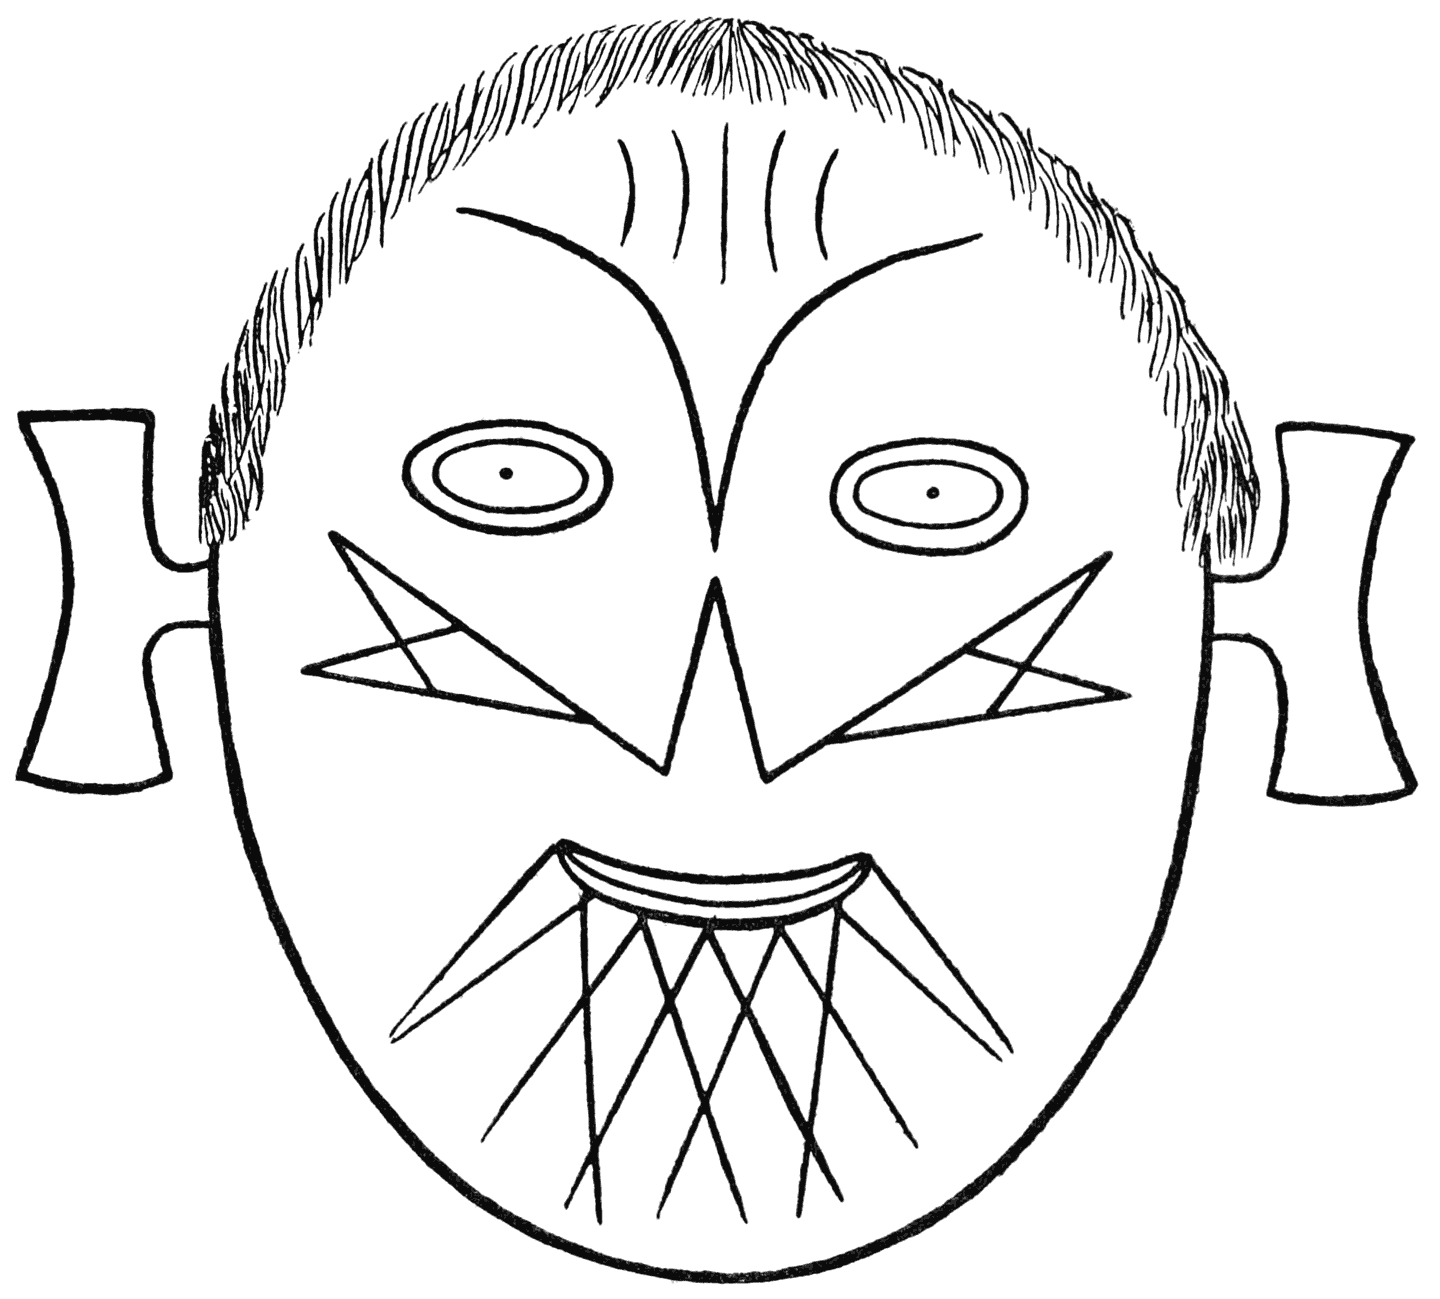 A Conjuror’s Mask.